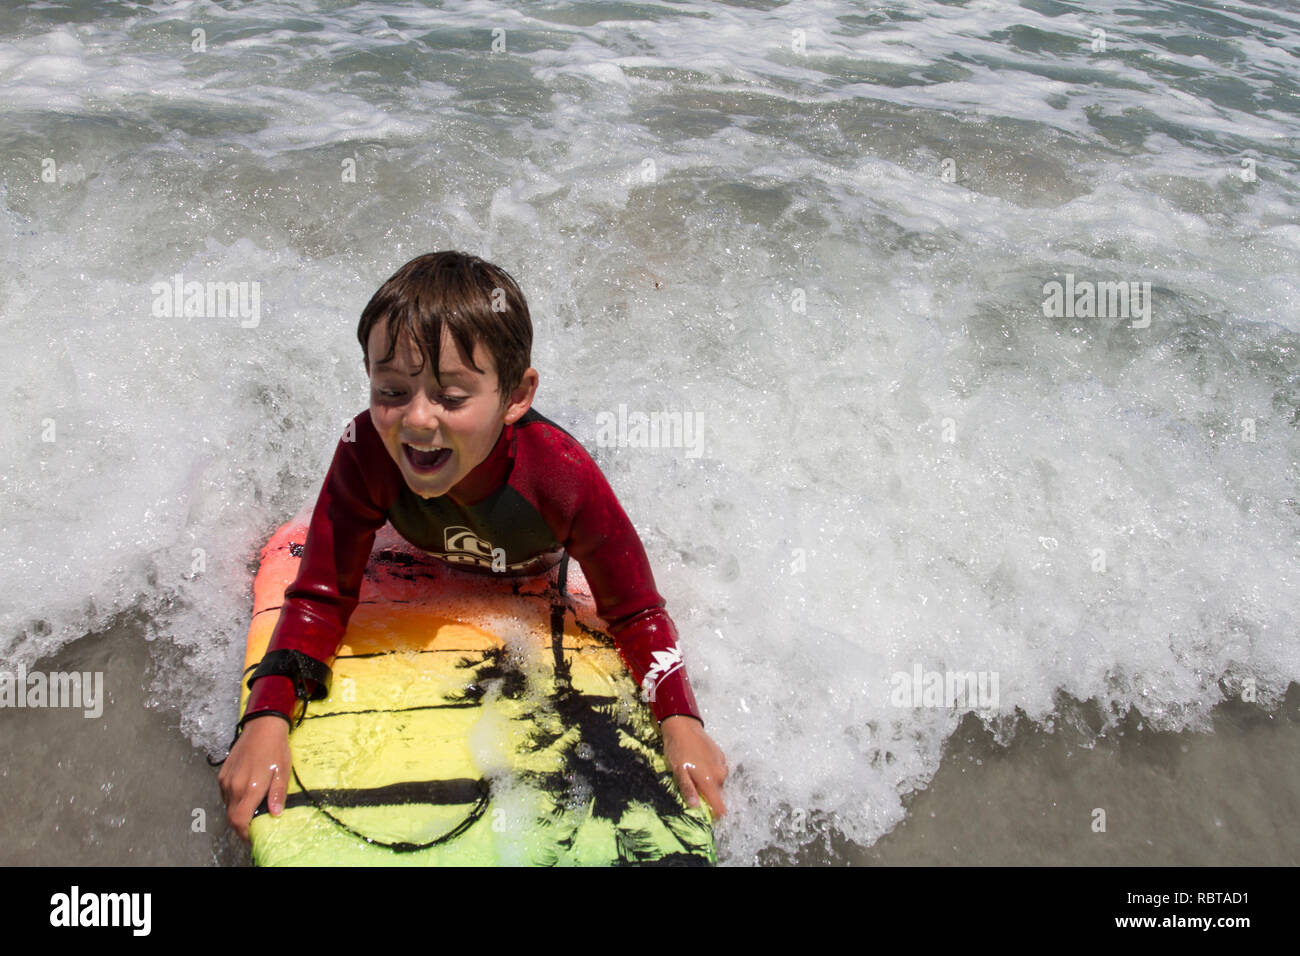 Young boy bodyboarding in the shallow waves Stock Photo